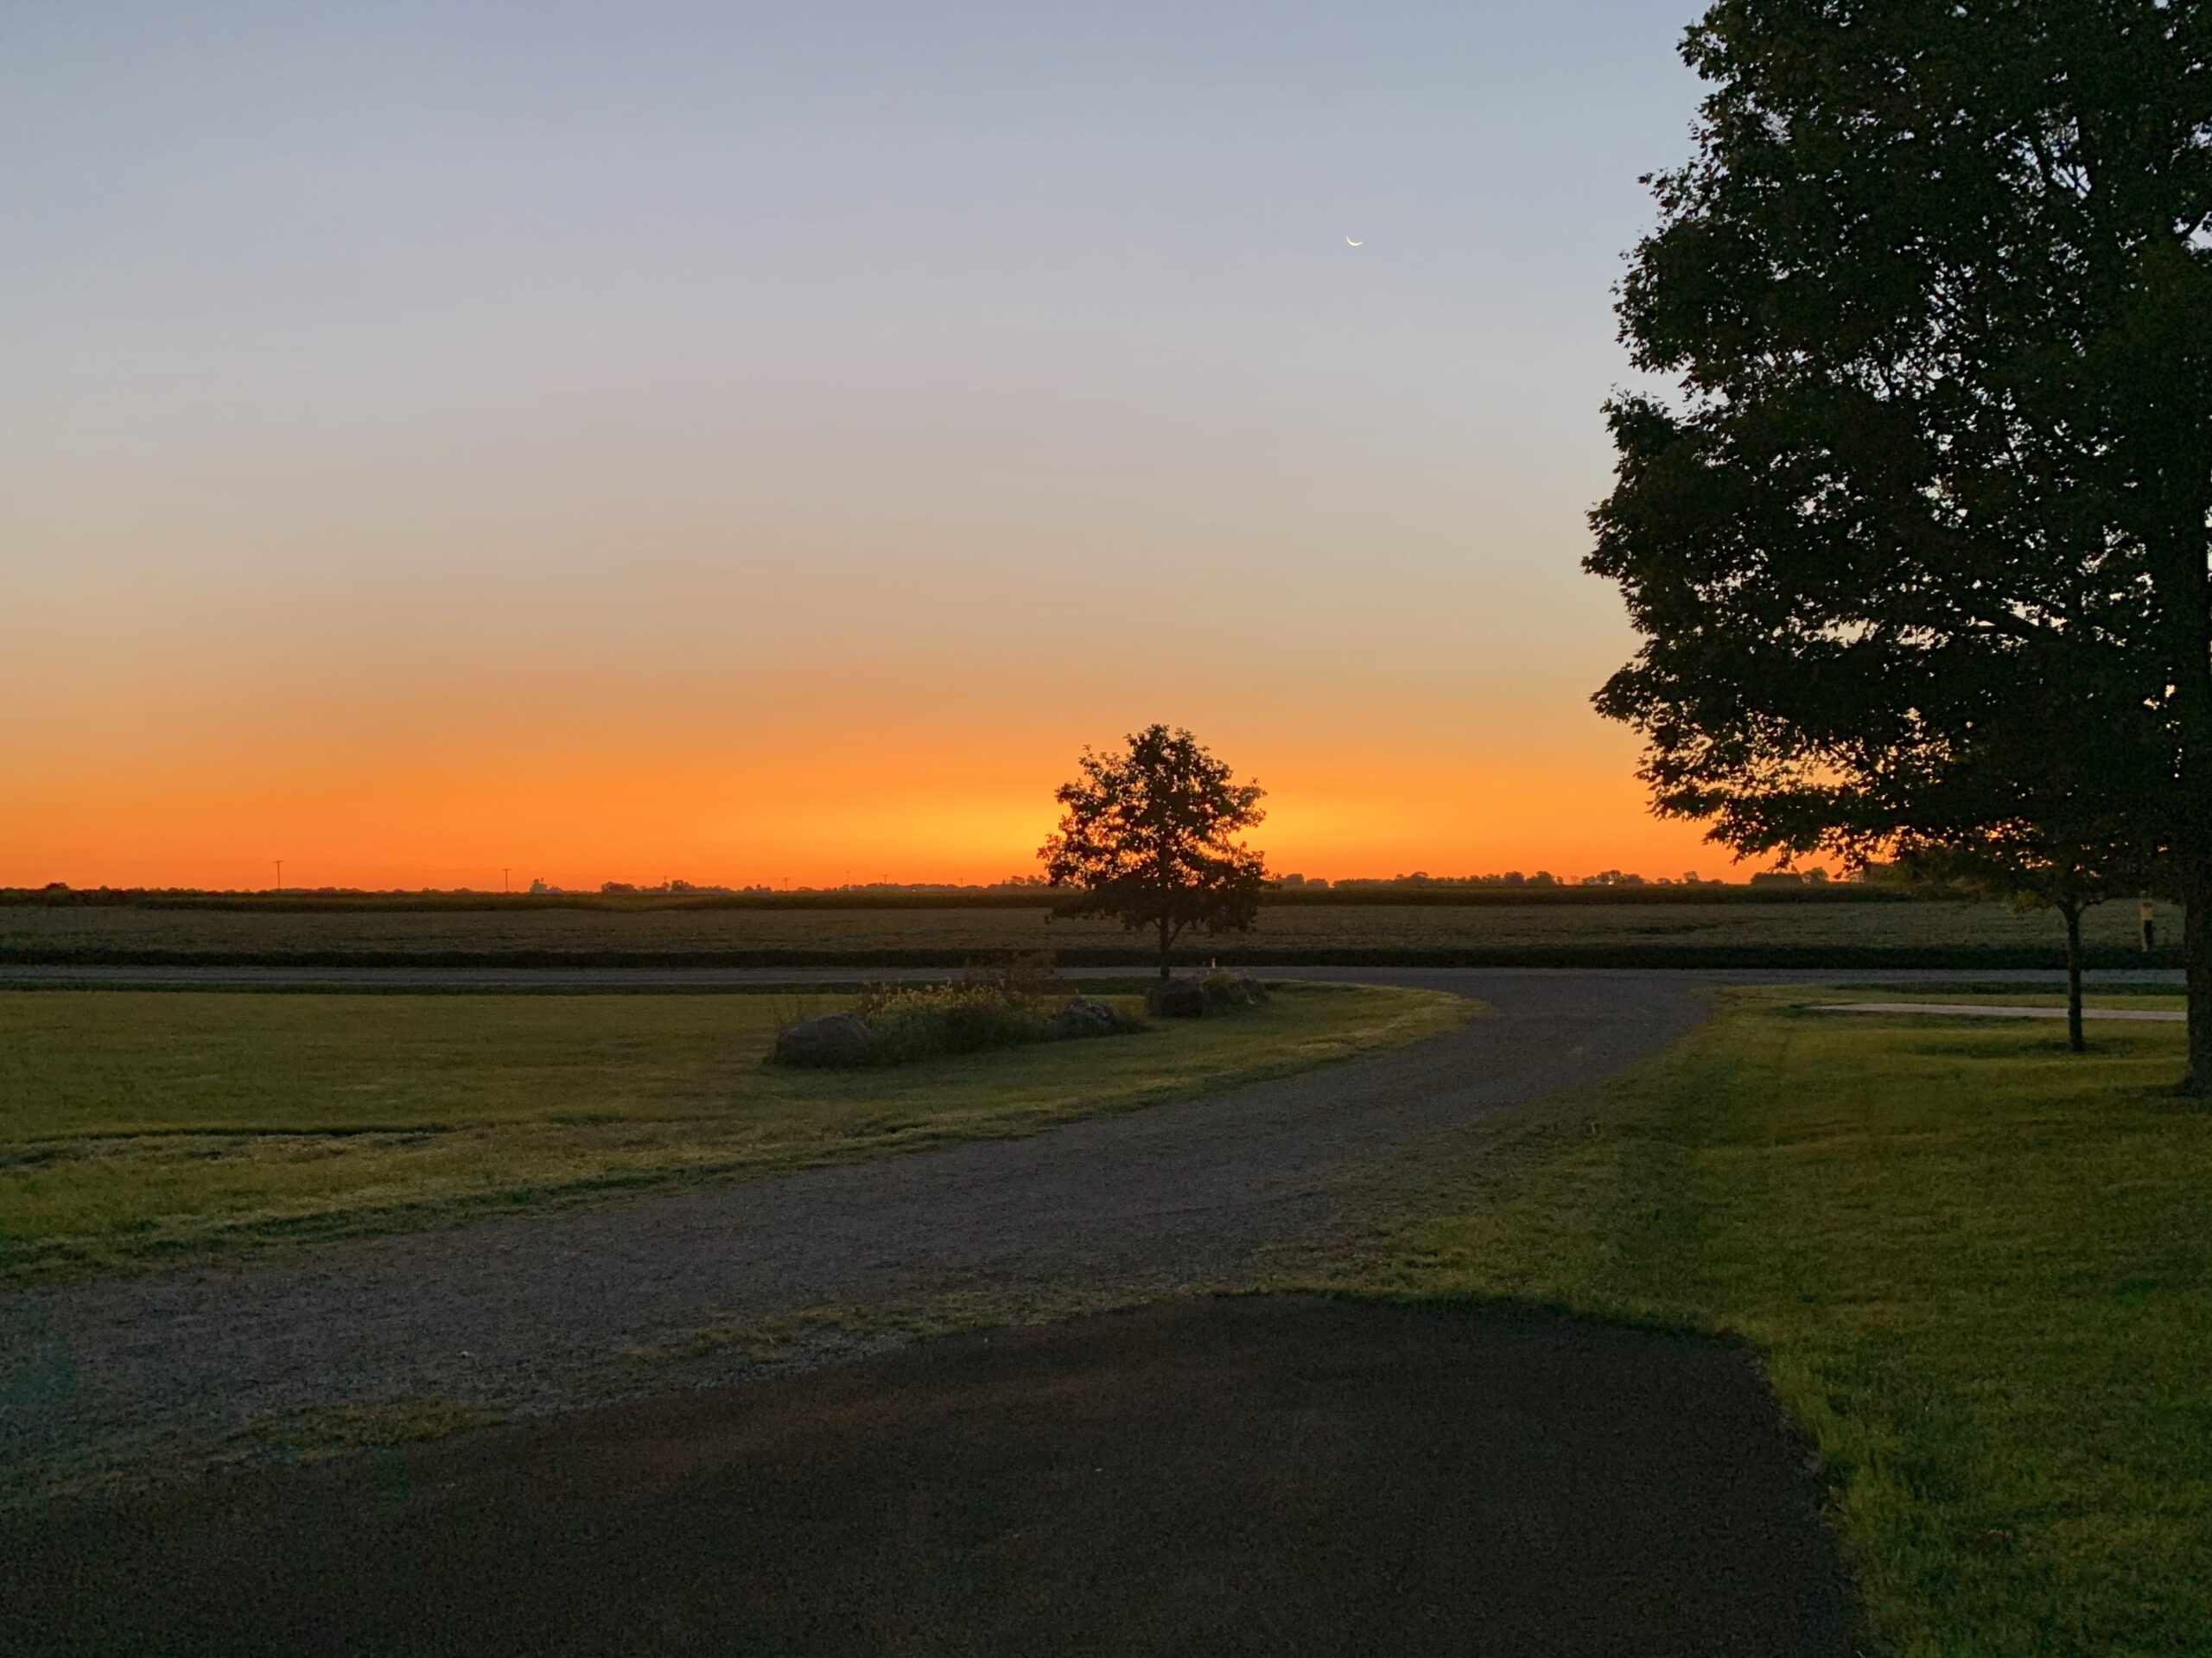 Photo of a flat, green space with a sunset glow on the horizon casting everything in silhouette. To the right is a big tree. A smaller tree is in the center.